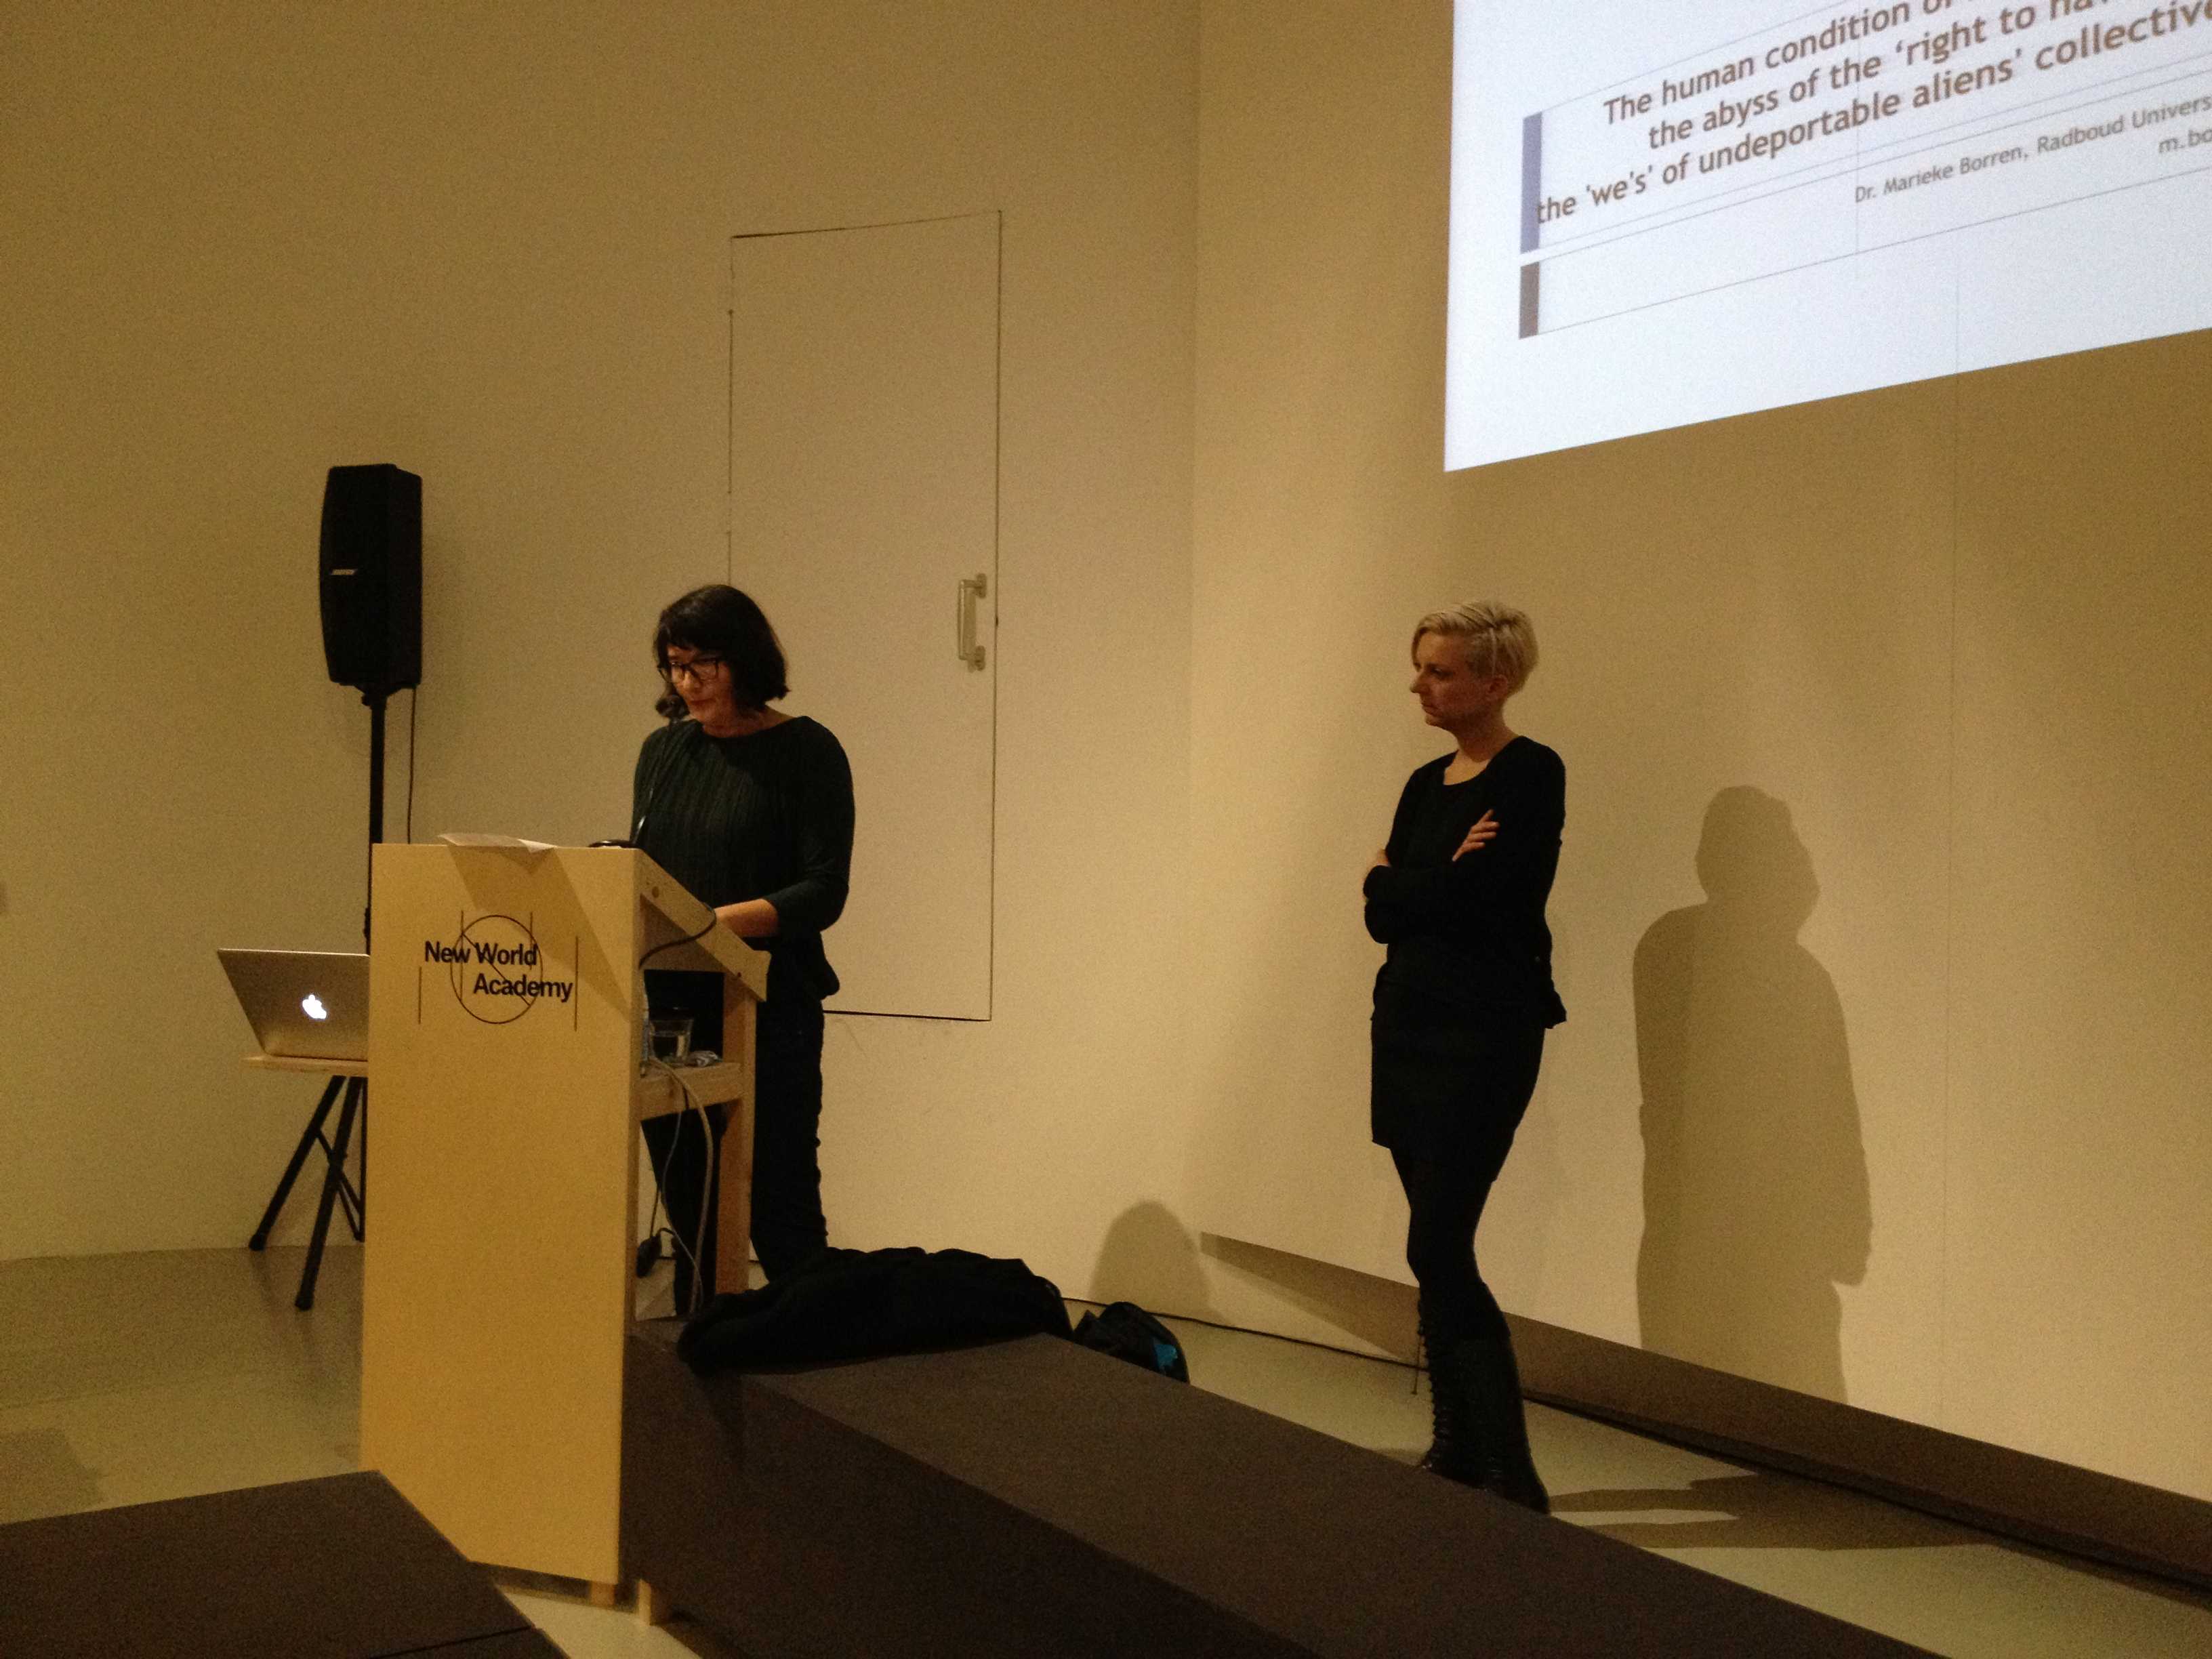 Jorinde Seijdel (behind the microphone) introduces lecture by Marieke Borren ( standing to the right) ( BAK, November 2013)